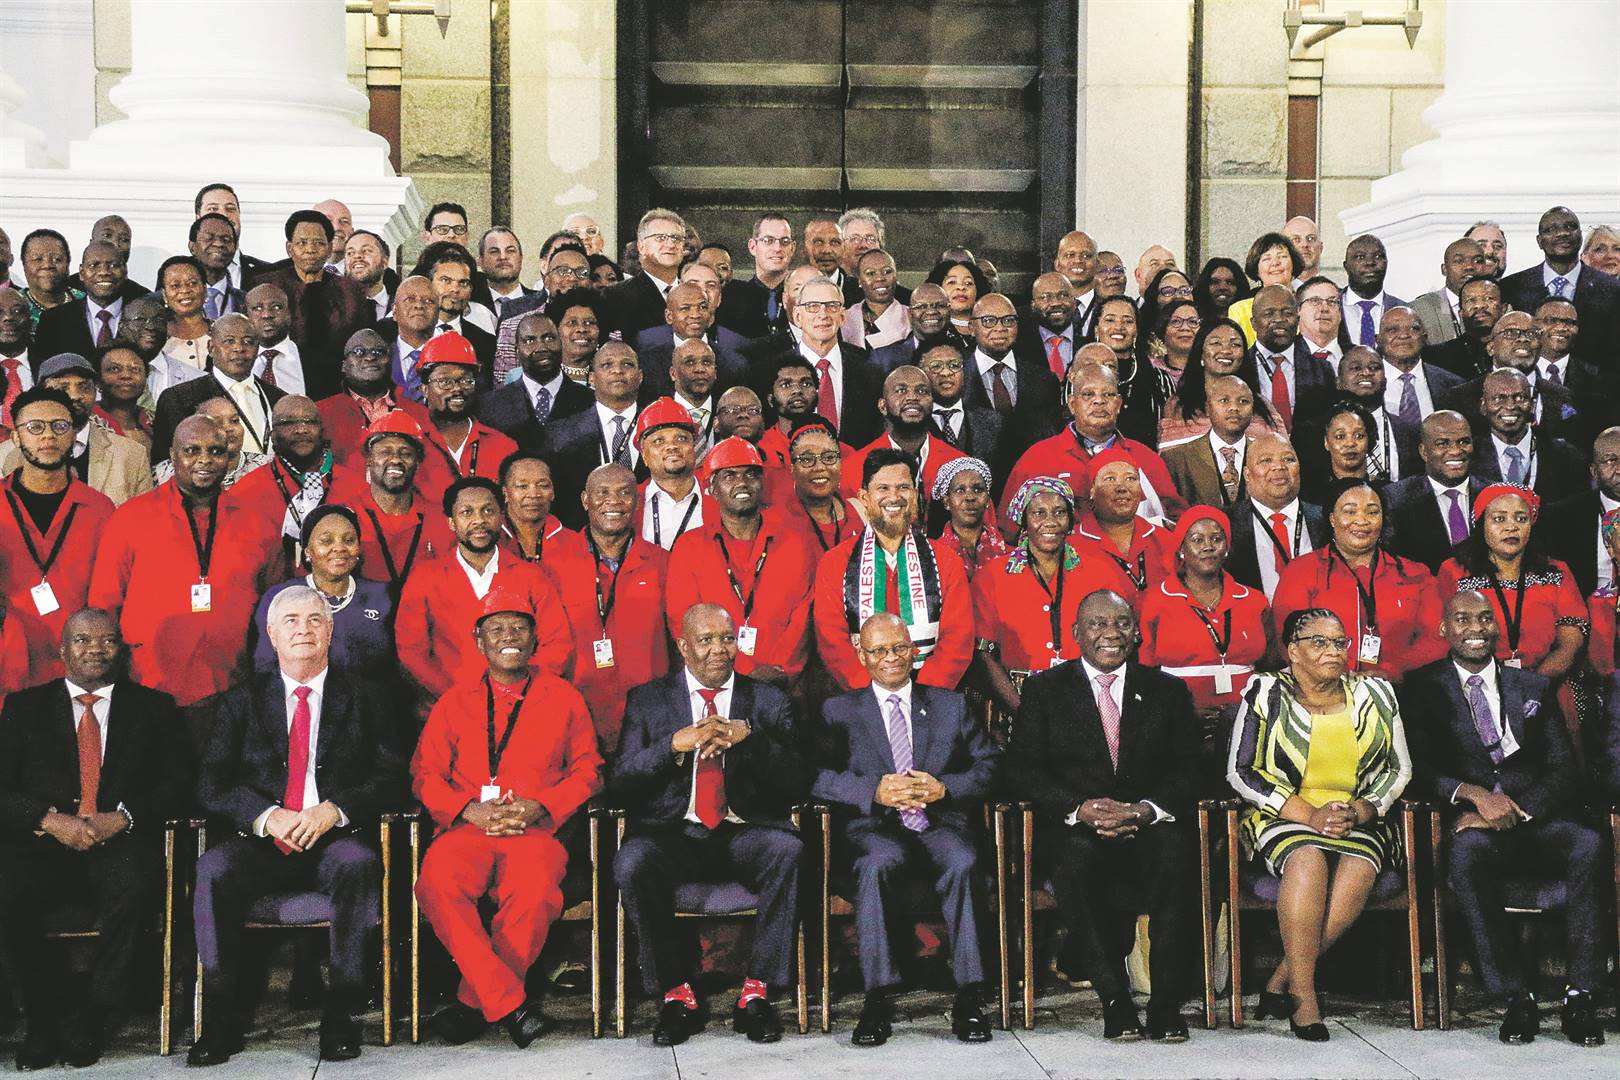 The heavies: Some of the 400-member Parliament with Justice Mogoeng Mogoeng after being sworn in to the National Assembly early this year. Picture: Adrian de Kock